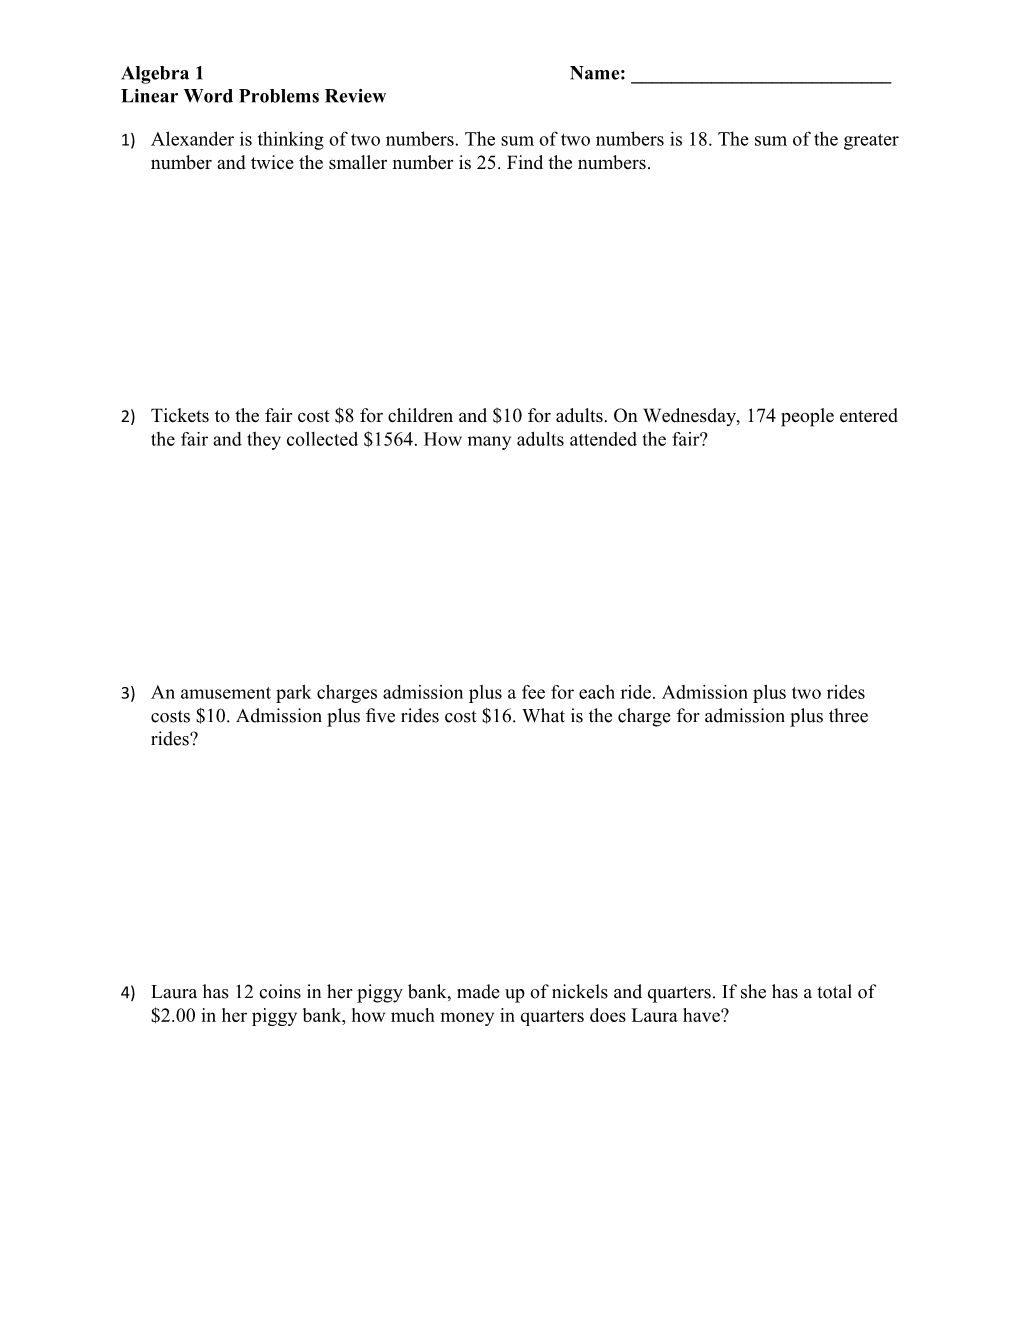 Linear Word Problems Review